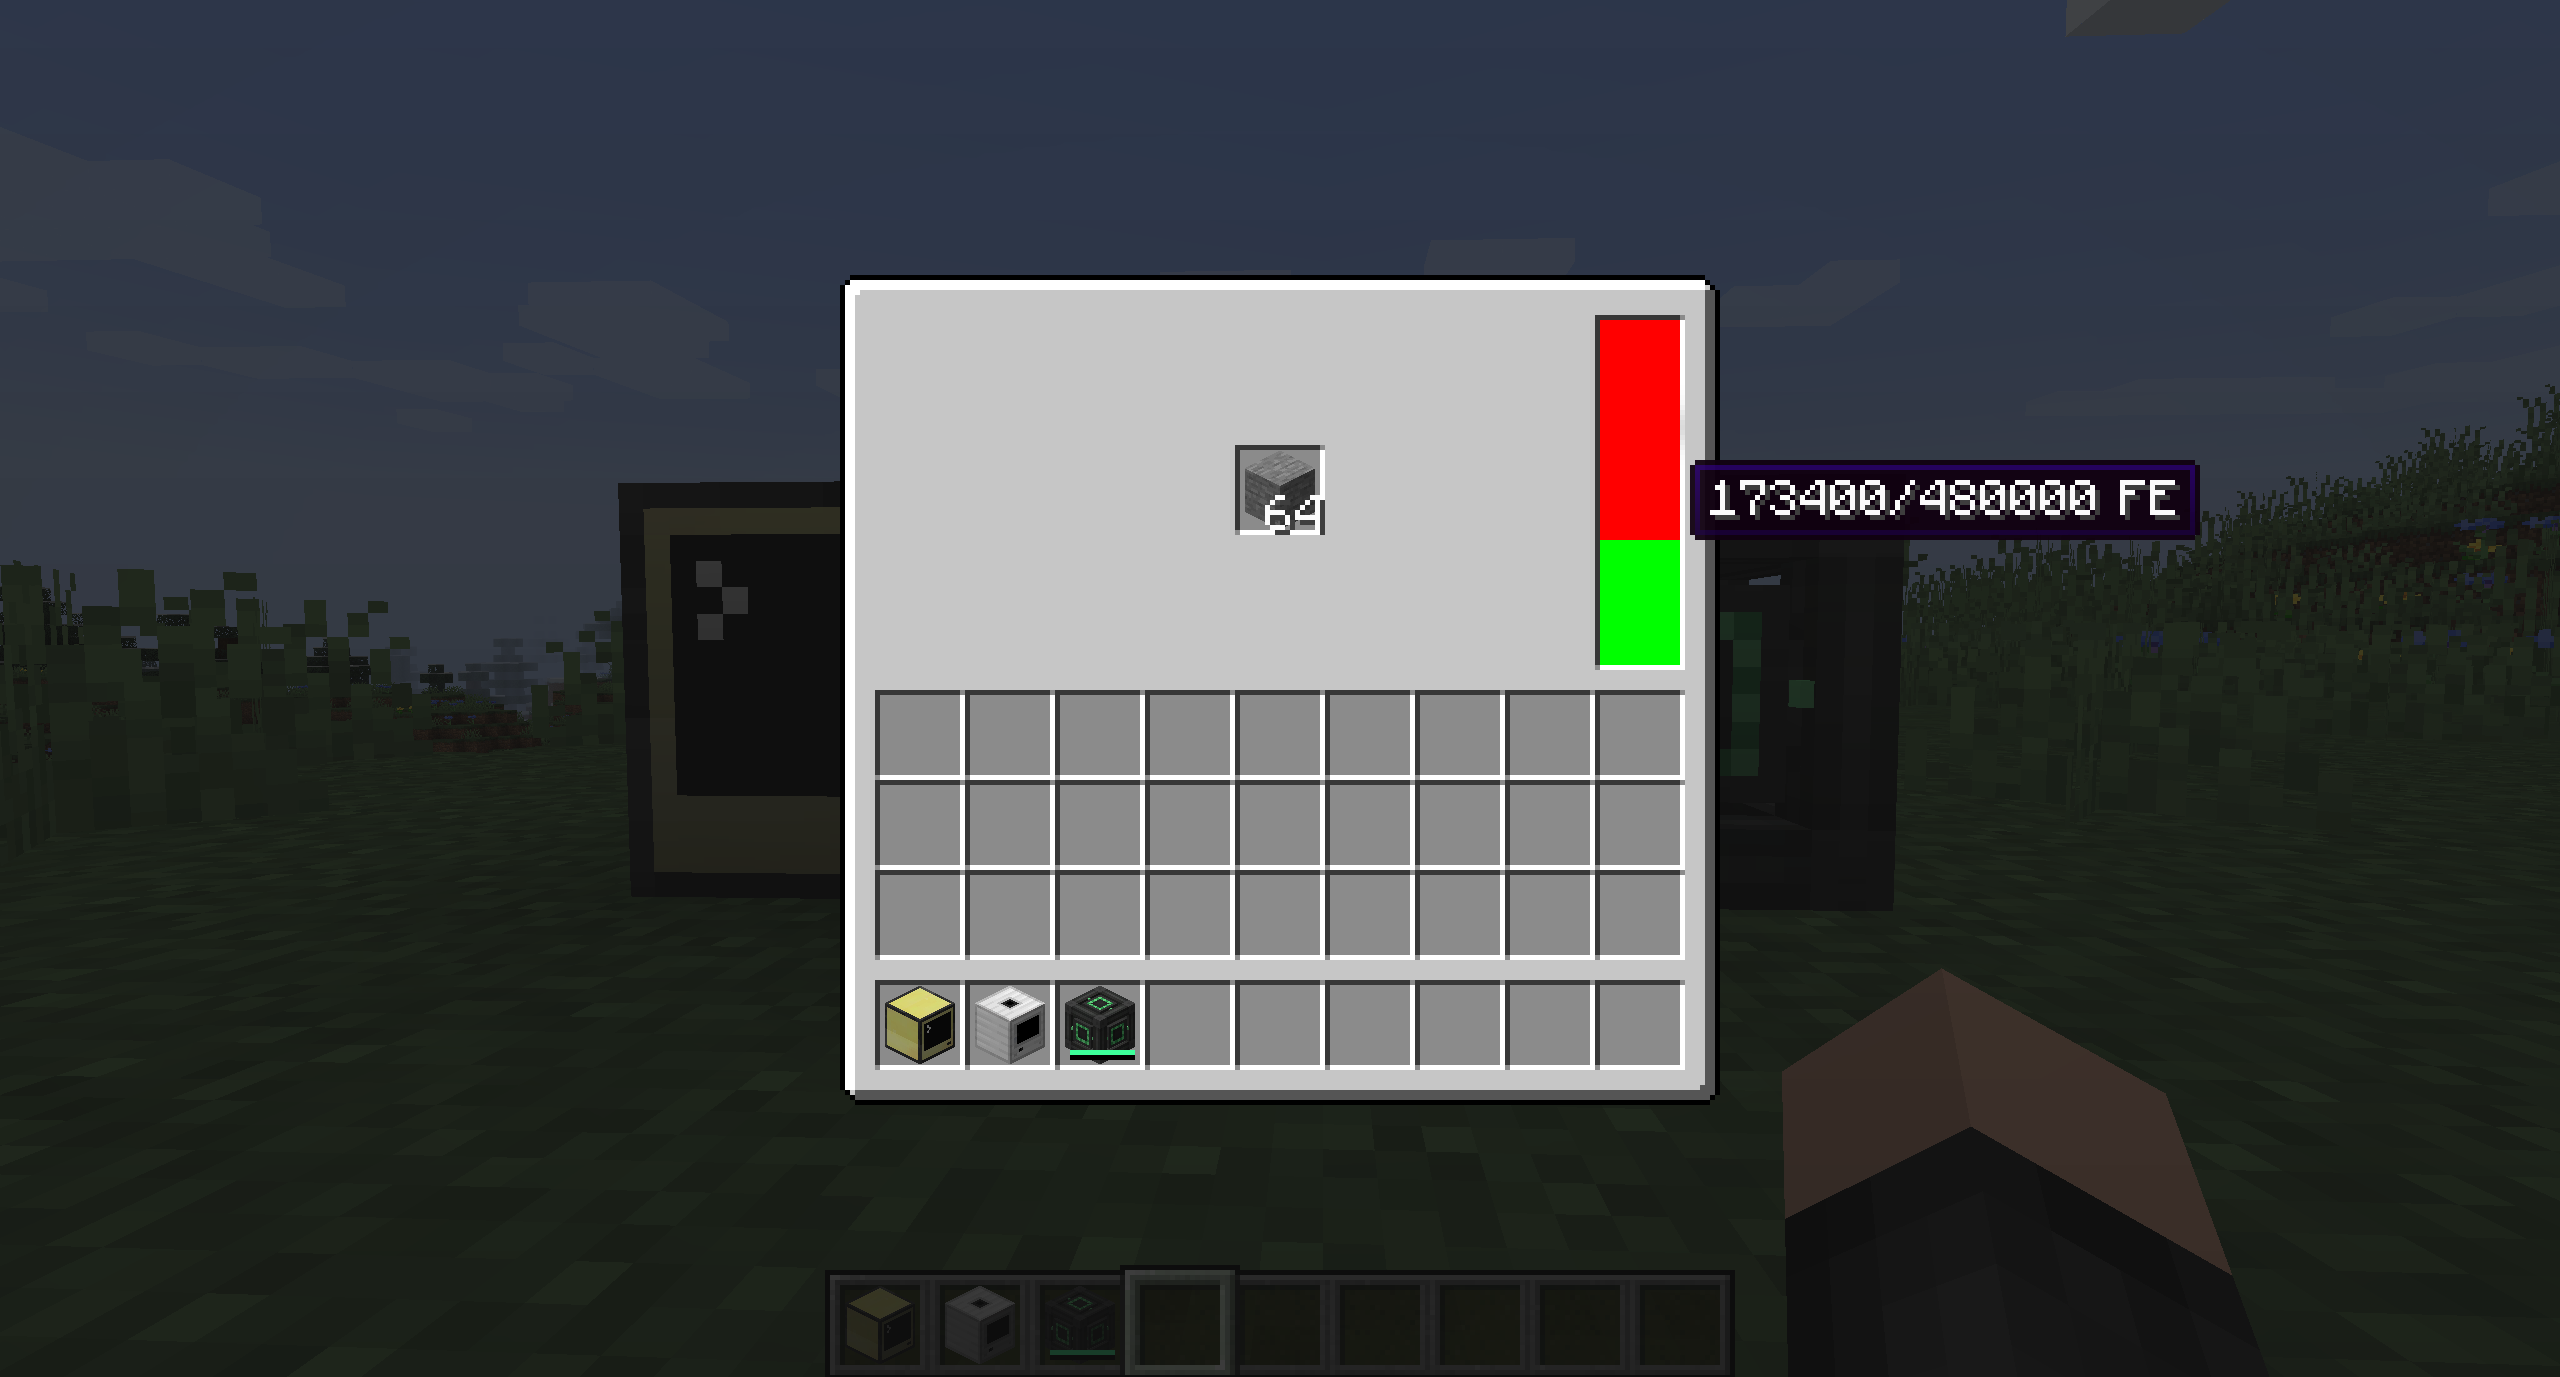 The gui of the digitizer. The player inventory and a single slot above it containing 64 stone.
On the right side is an energy indicator in the form of a bar with red and green color indicating the stored energy.
The cursor is hovering above the bar and the Tooltip "173400/480000FE" is shown.